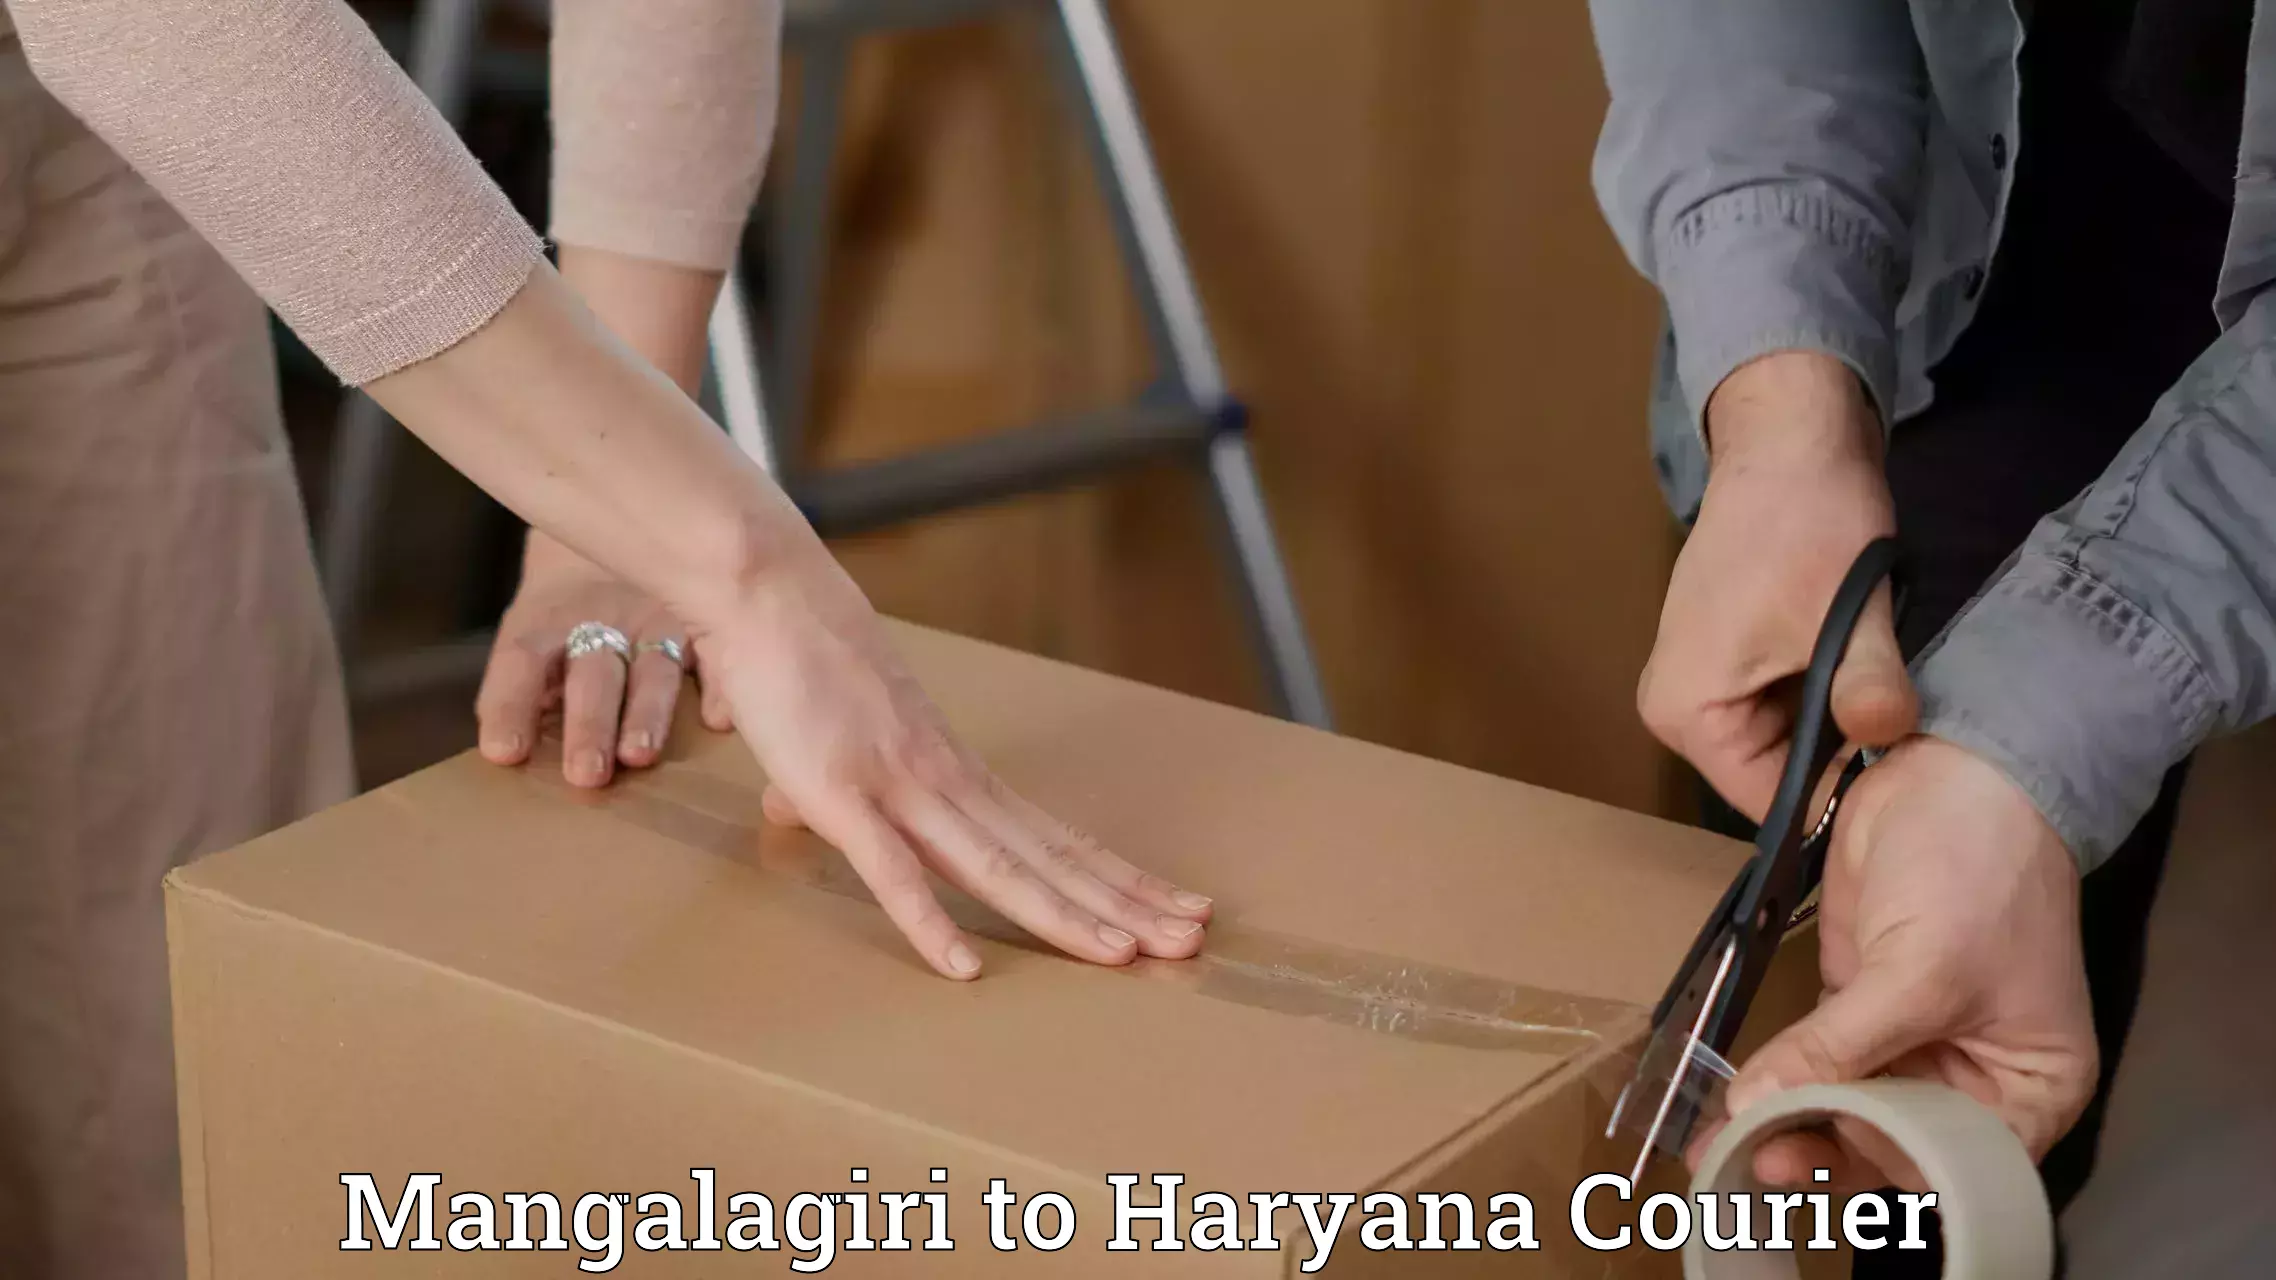 Courier service efficiency in Mangalagiri to Haryana